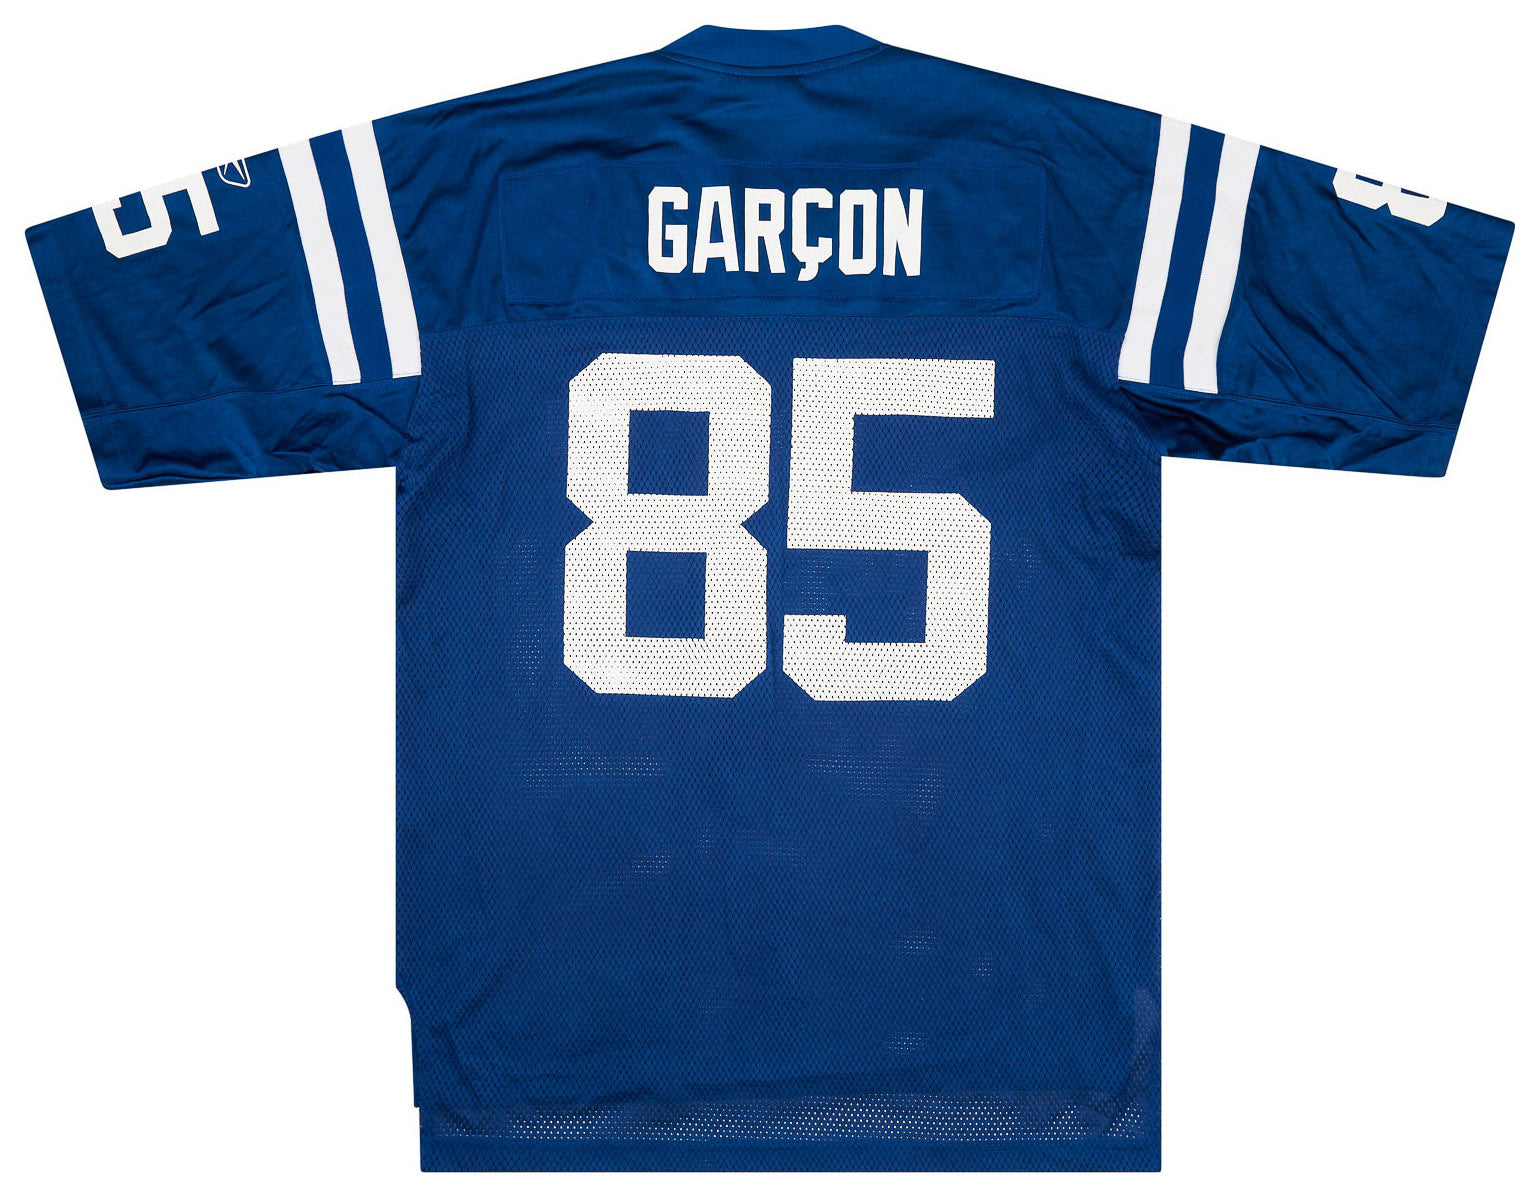 2008-11 INDIANAPOLIS COLTS GARCON #85 REEBOK ON FIELD JERSEY (HOME) L